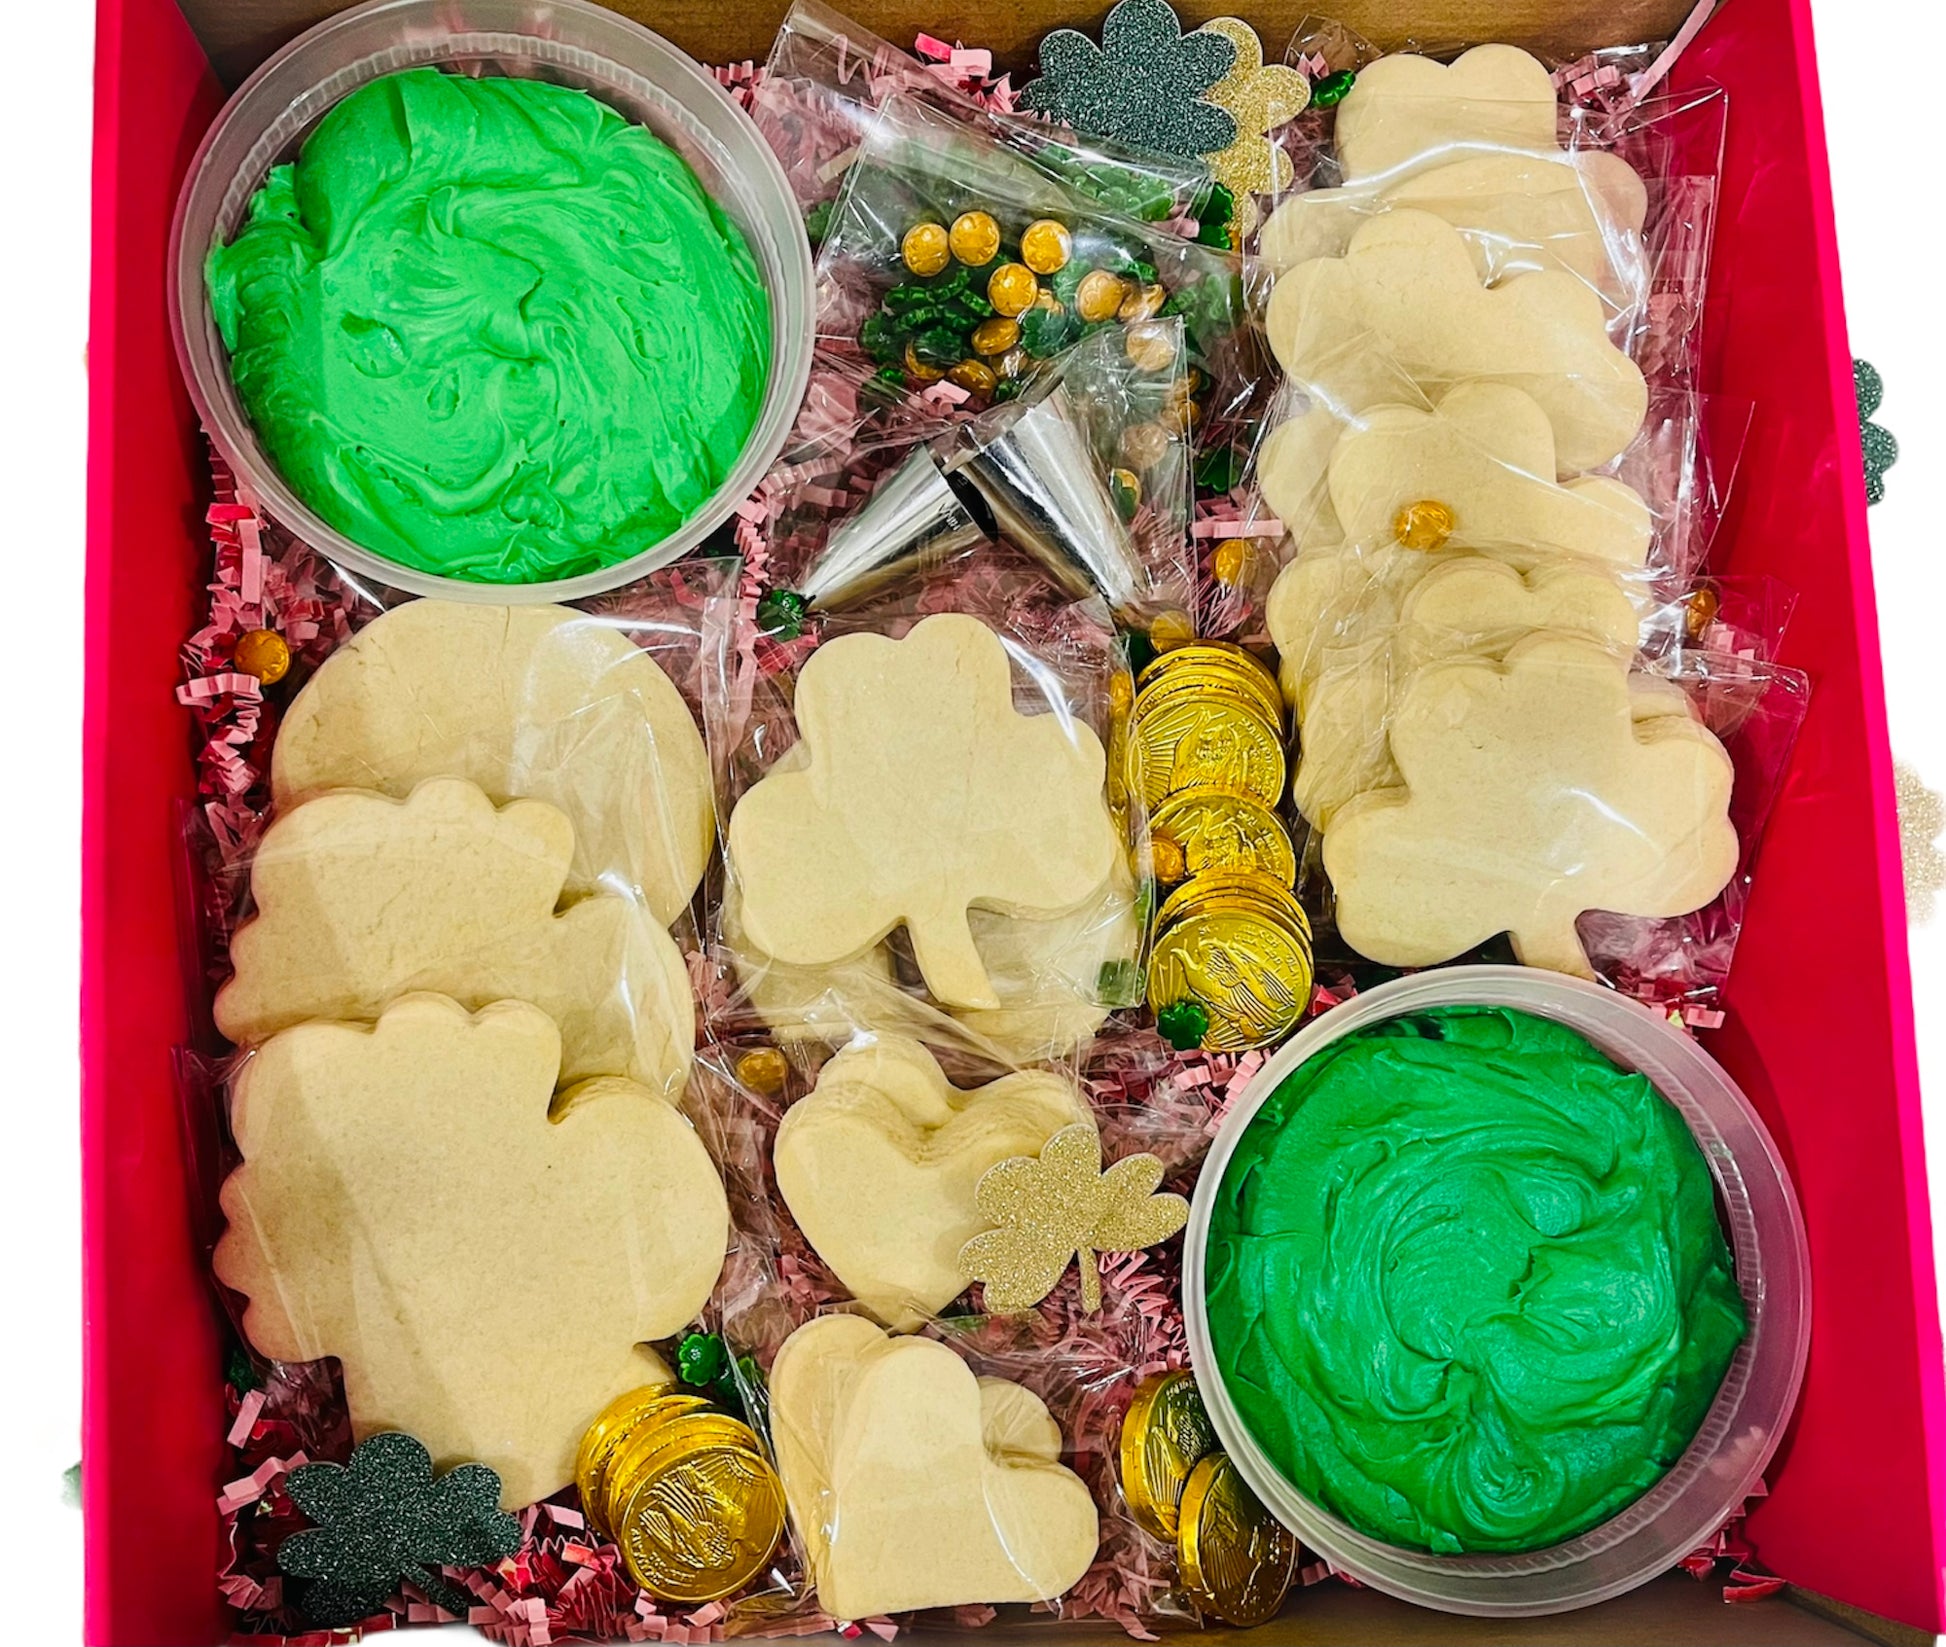 st patrique day sugar cookies, cookie creation kits, best treats in la , gift ideaa